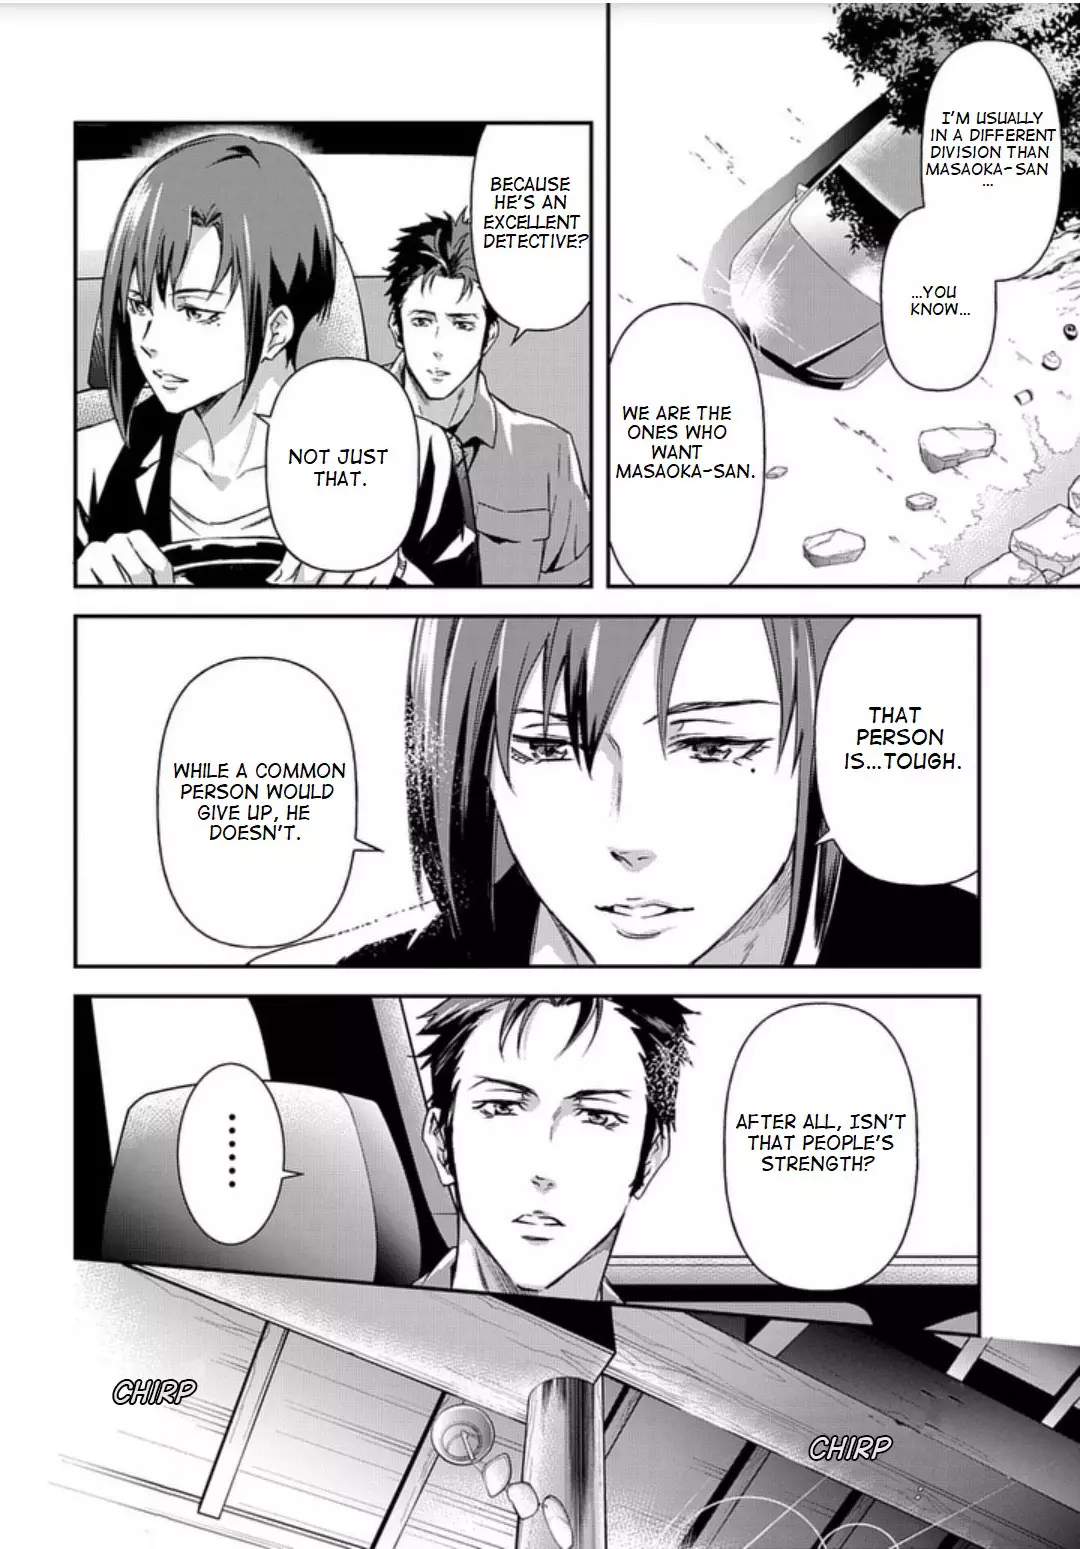 Psycho-Pass: Sinners Of The System Case 2 - First Guardian - 3 page 26-79cccbab